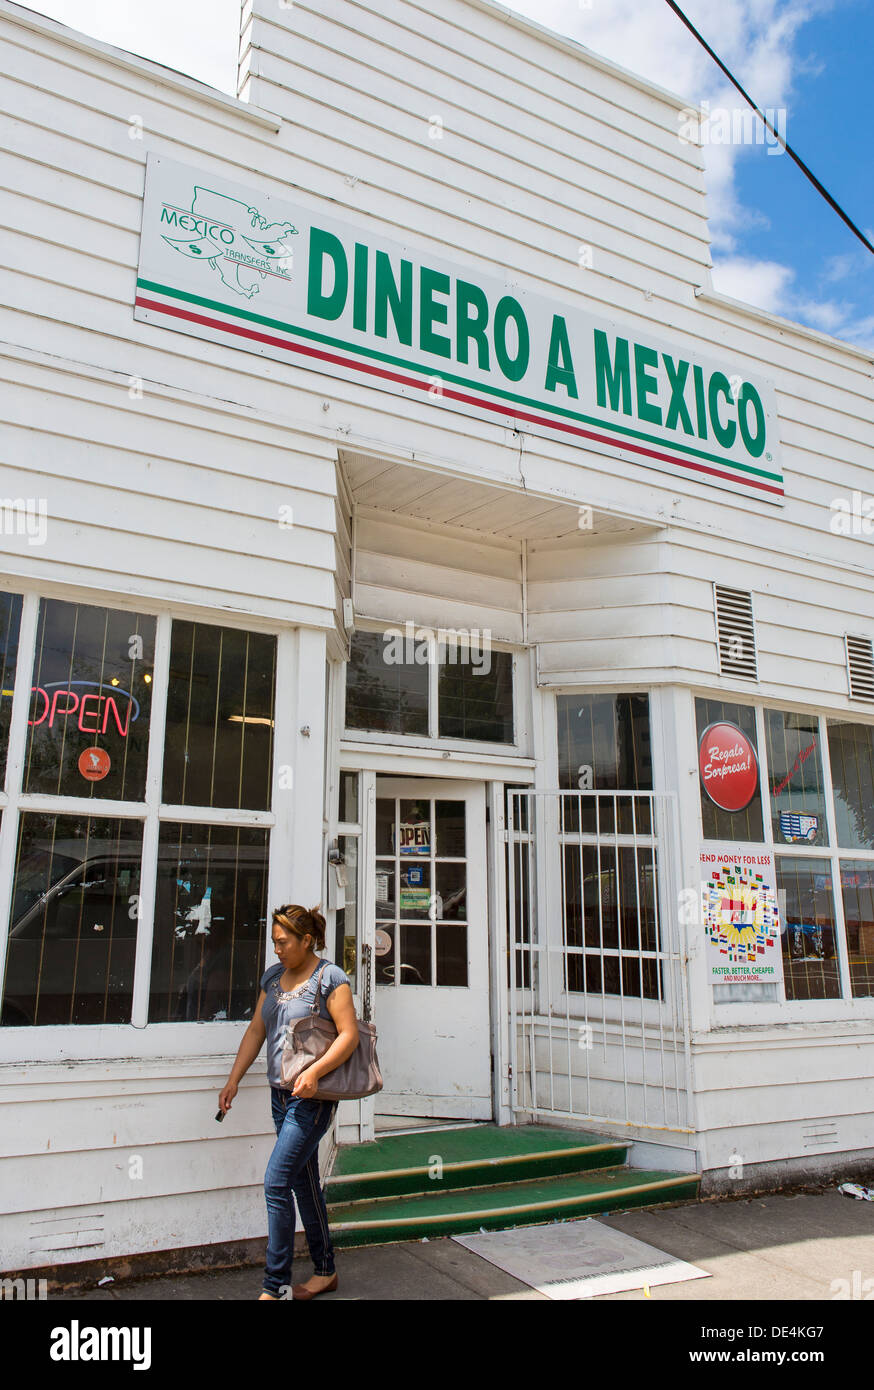 WOODBURN, OREGON, USA - Woman exits store with Dinero a Mexico sign that offers remittance service to Mexican immigrants. Stock Photo